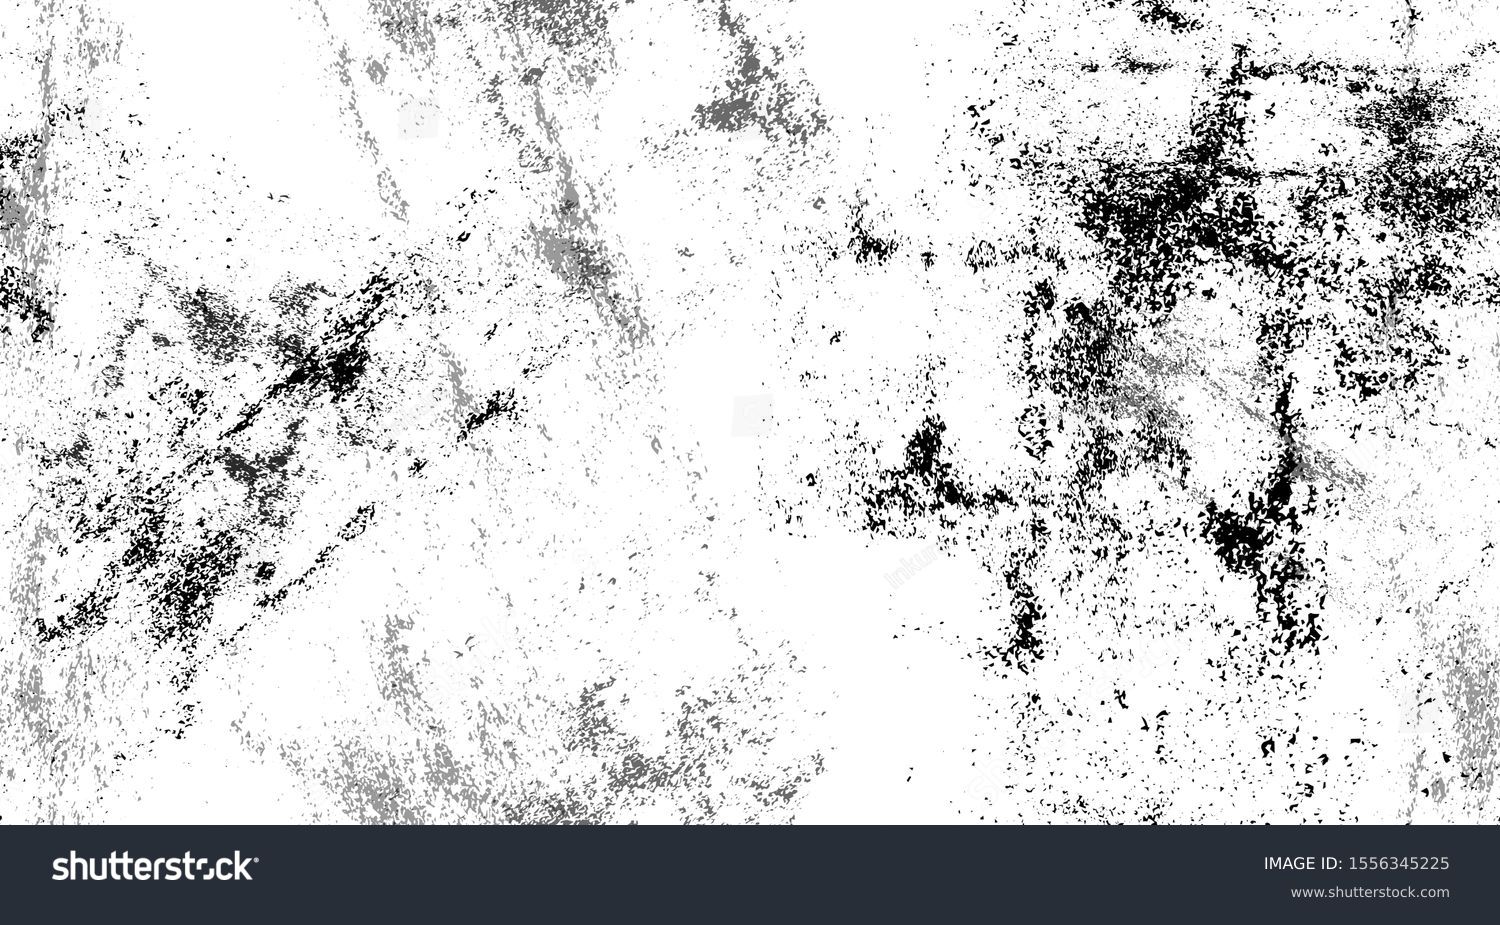 Distressed black and white grunge seamless texture. Overlay scratched design background. #1556345225